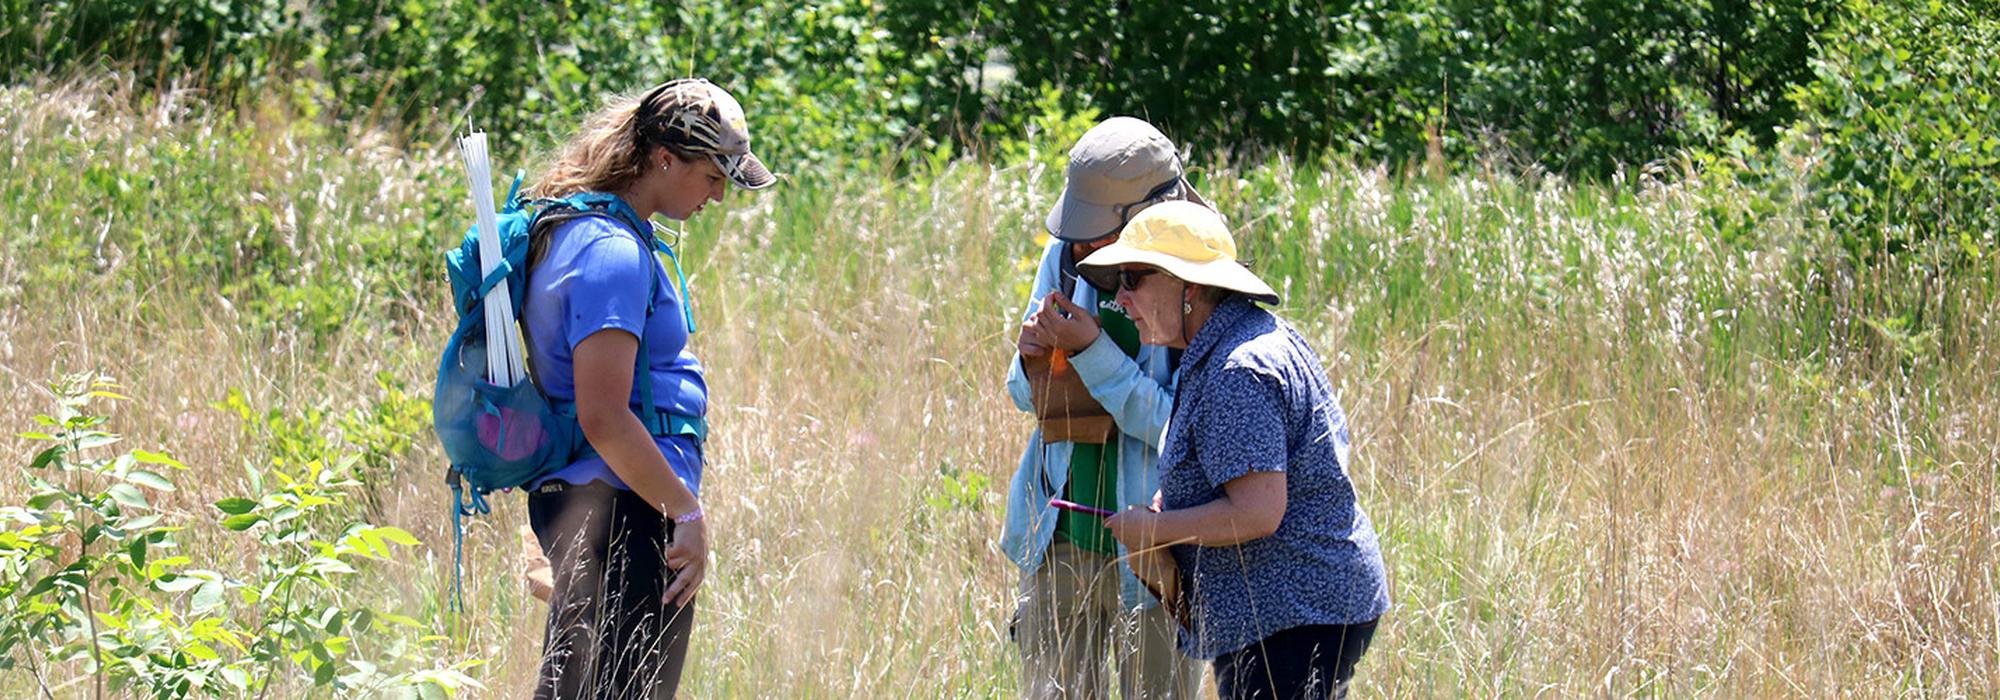 Faculty member and students examining in a field of long grass